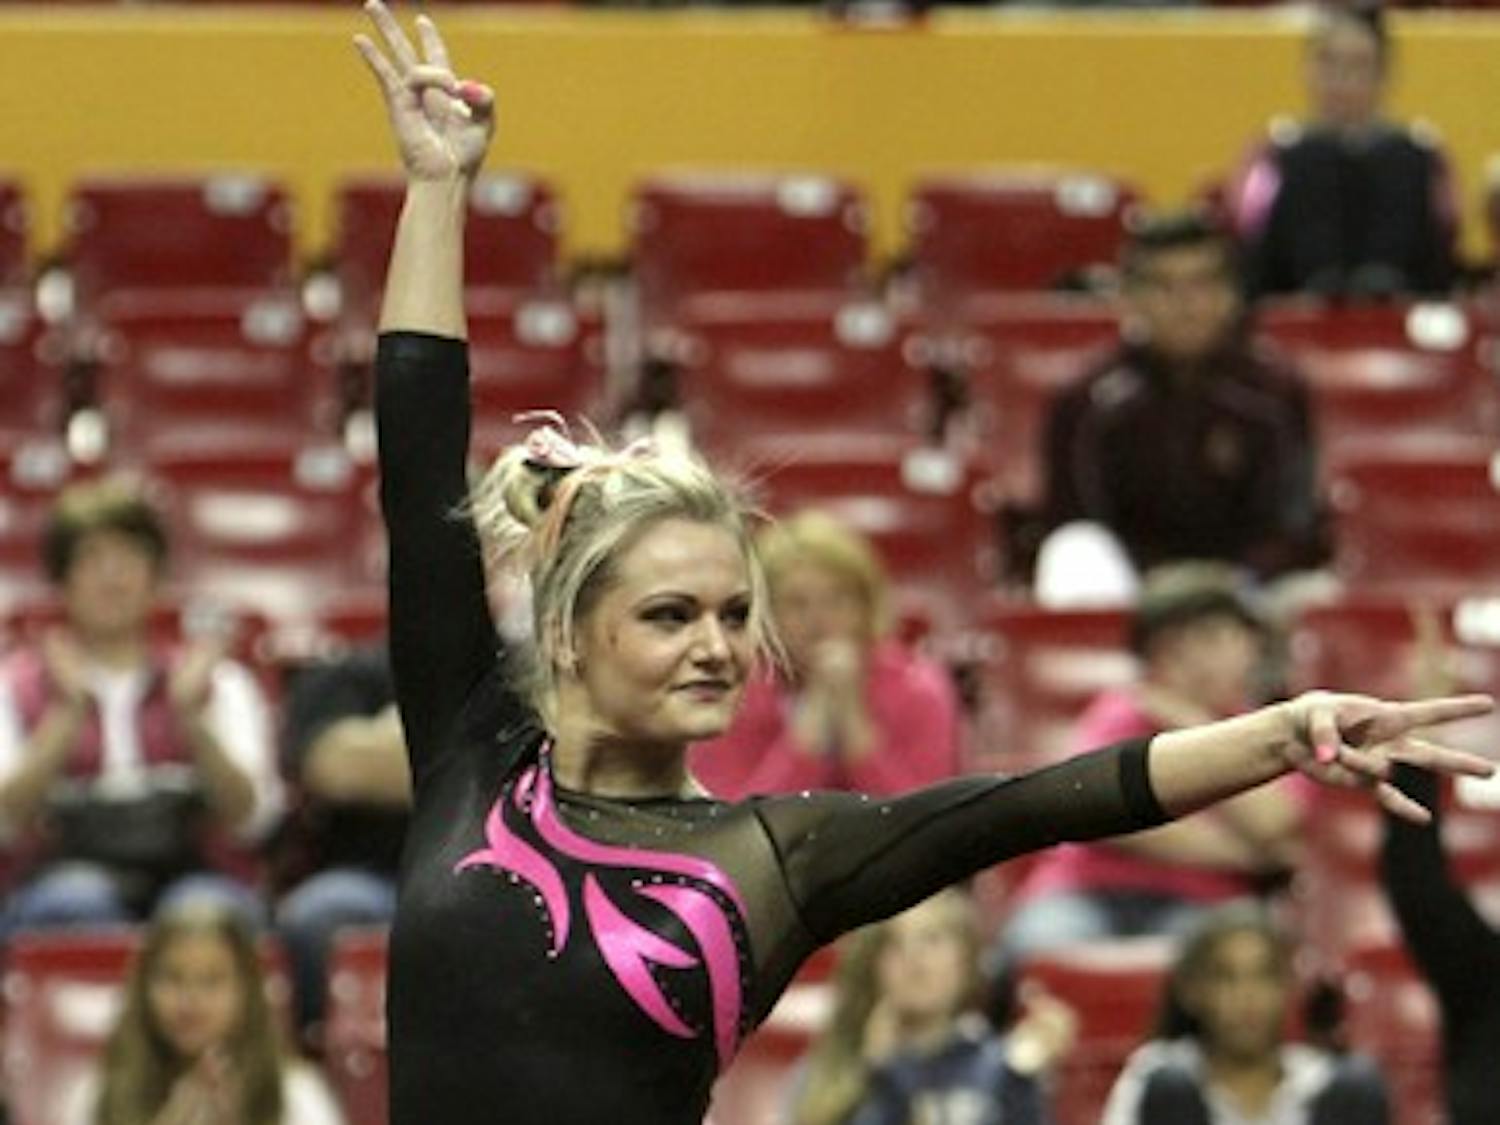 Sophomore Natasha Sundby scored the Sun Devil's first 9.900 of the season for her floor routine at the Jan. 25 meet against UCLA. The gymnasts wore pink leotards to promote breast cancer awareness. (Photo by Sam Rosenbaum)